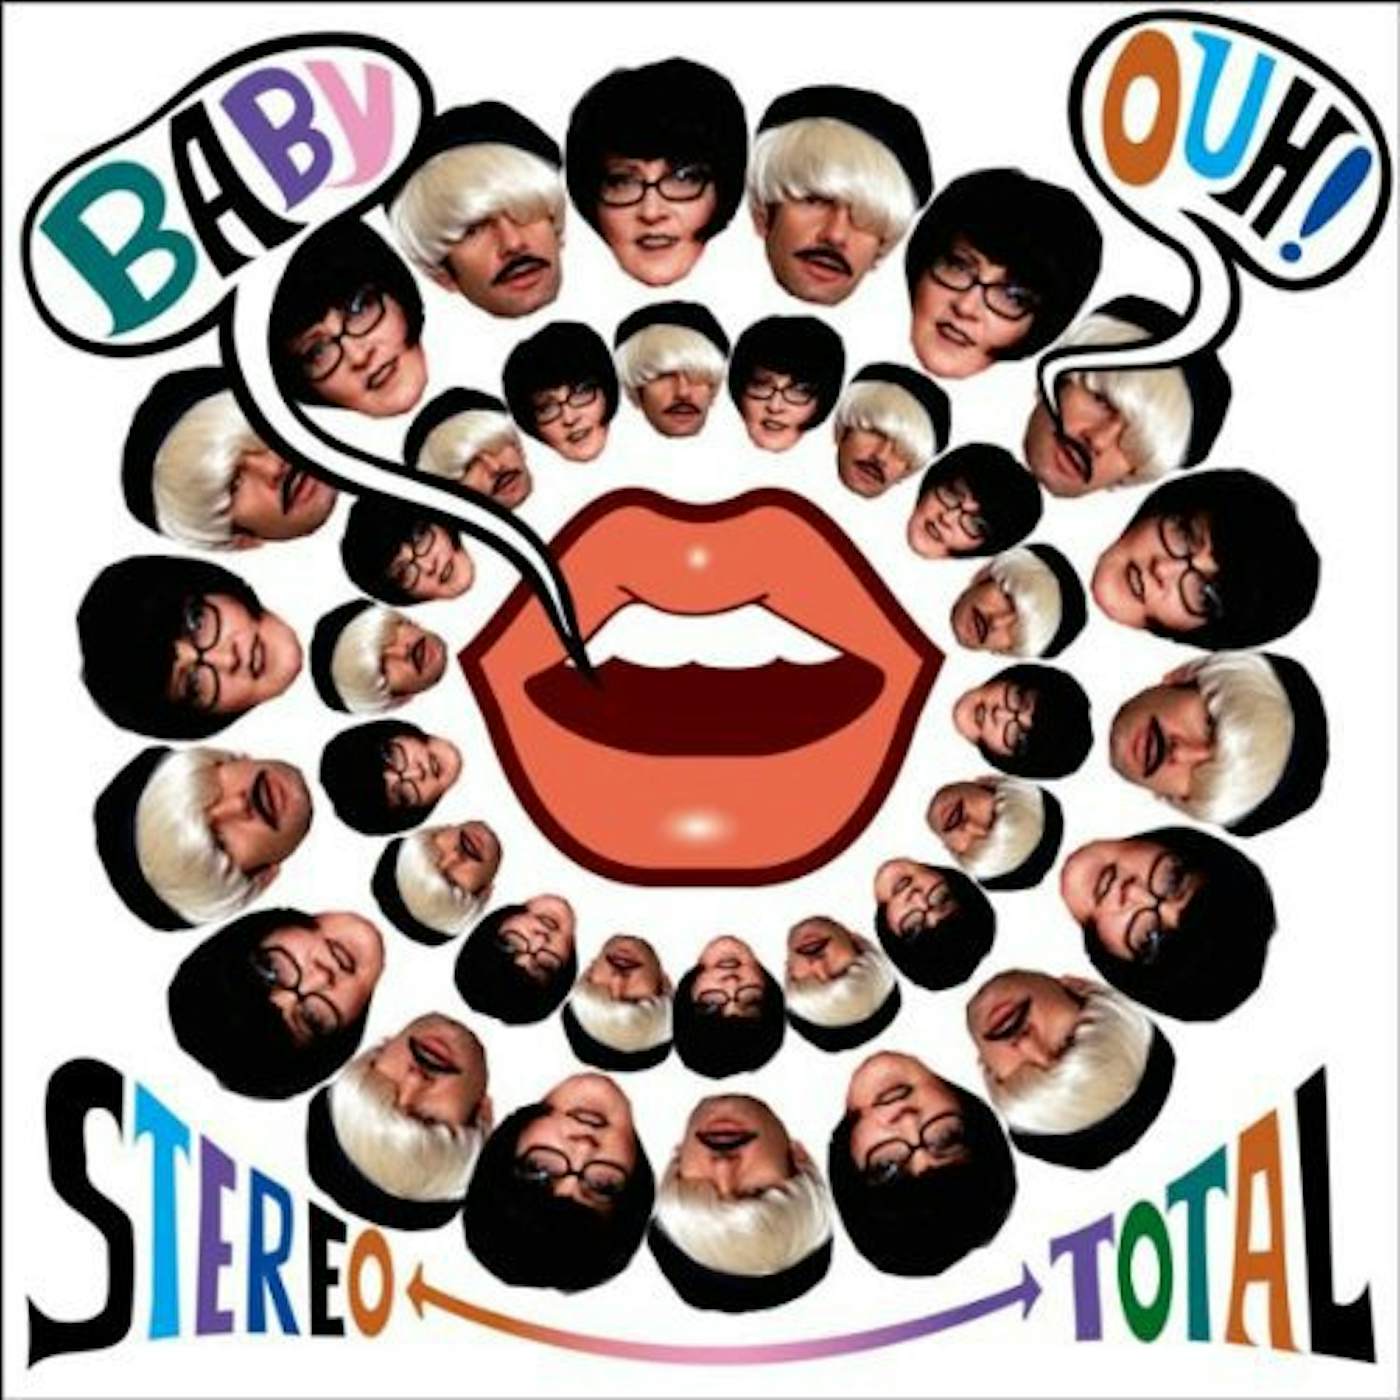 Stereo Total Baby Ouh! Vinyl Record